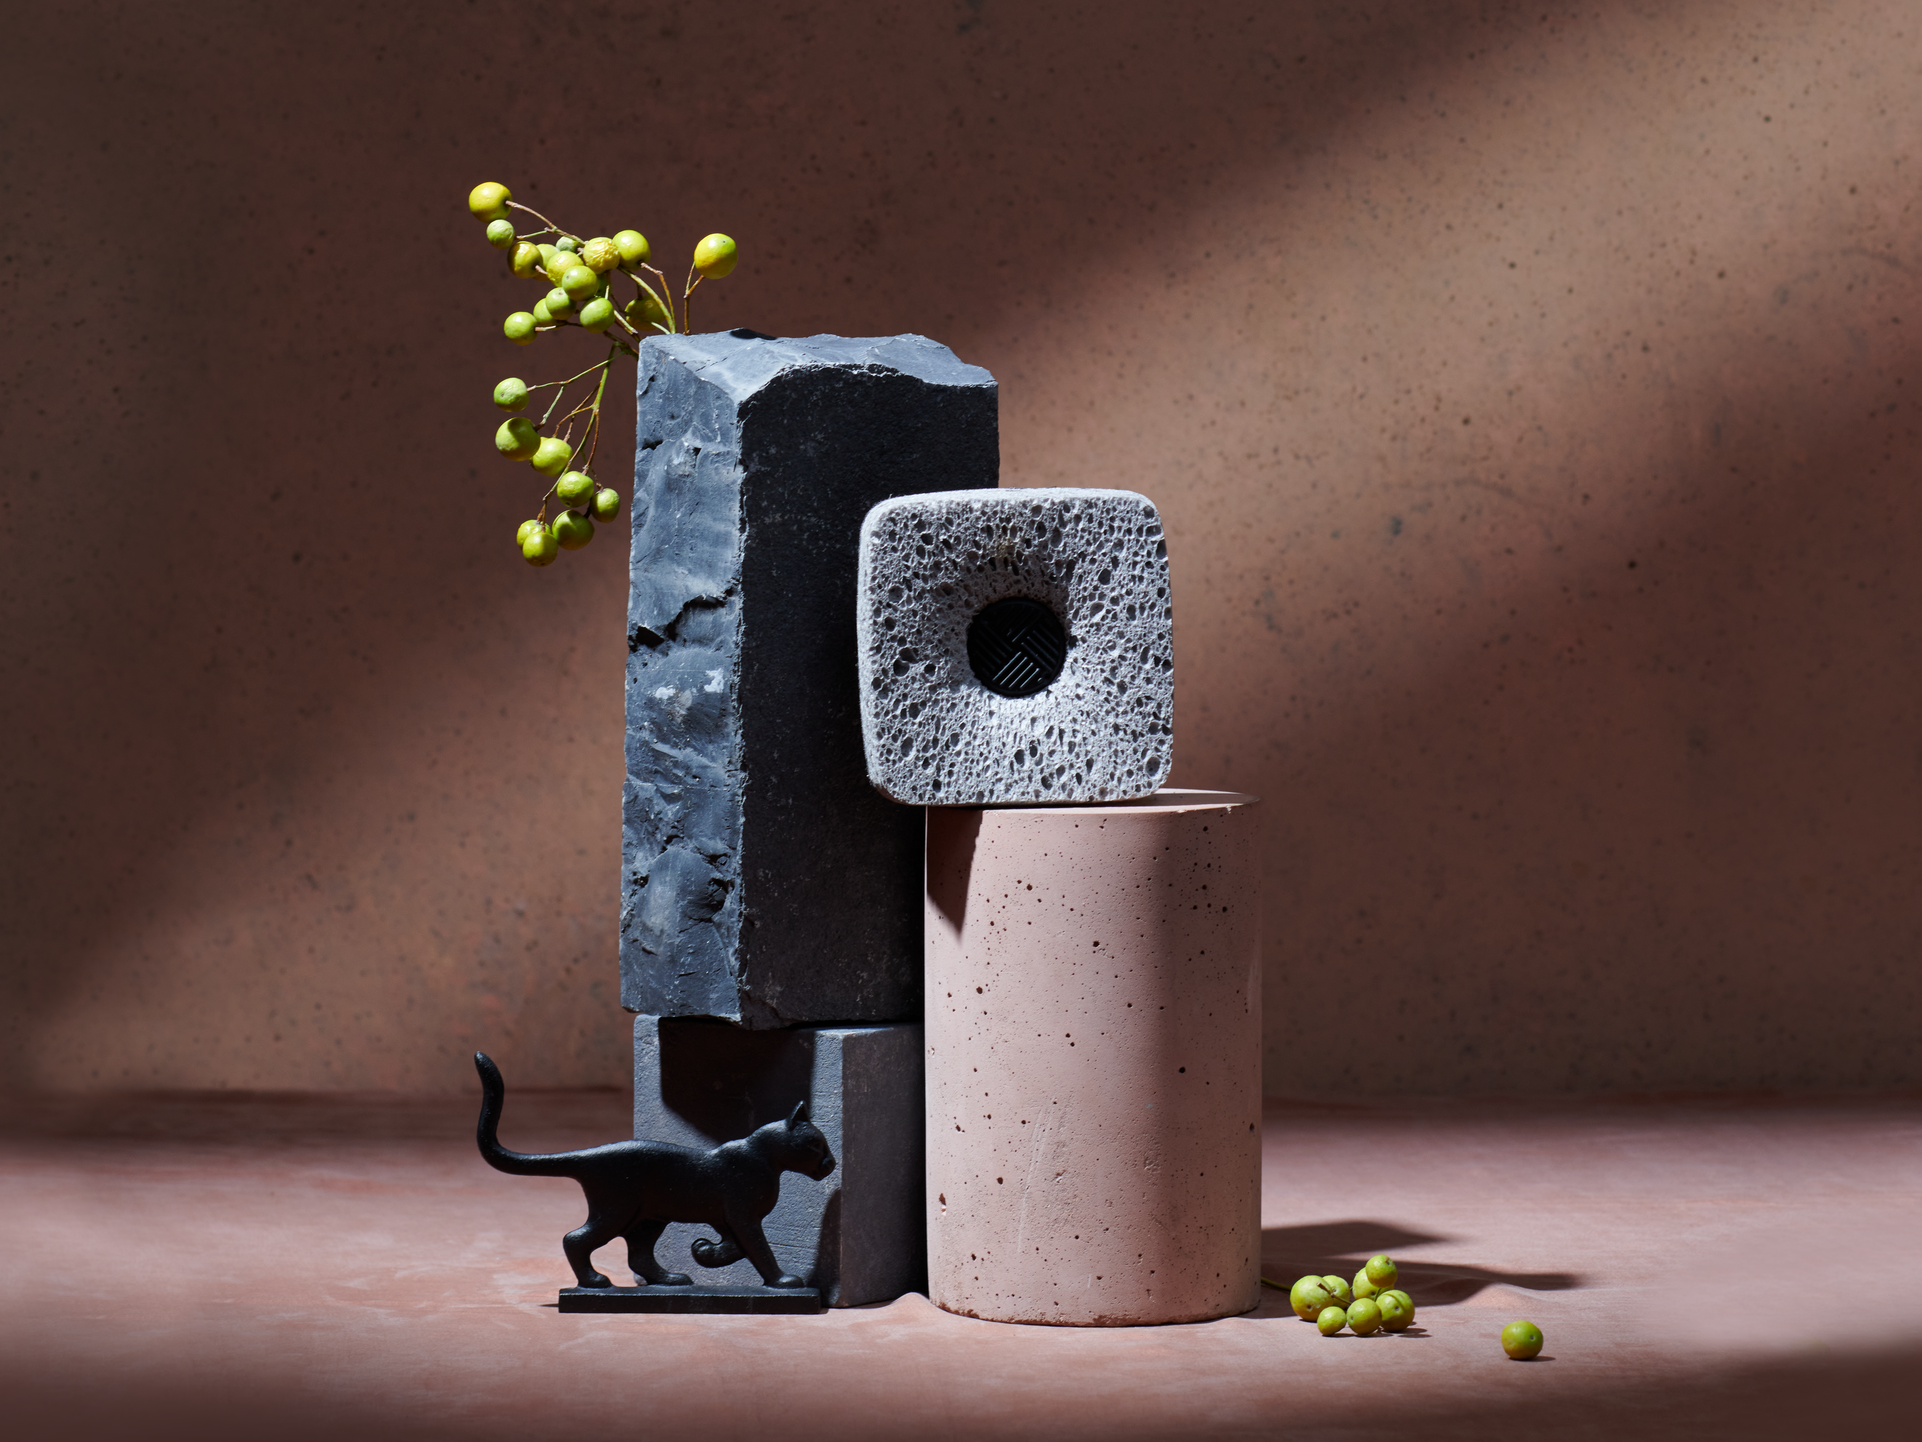 Curio Homegoods Ionic Counter Sponge among rocks and sculptures